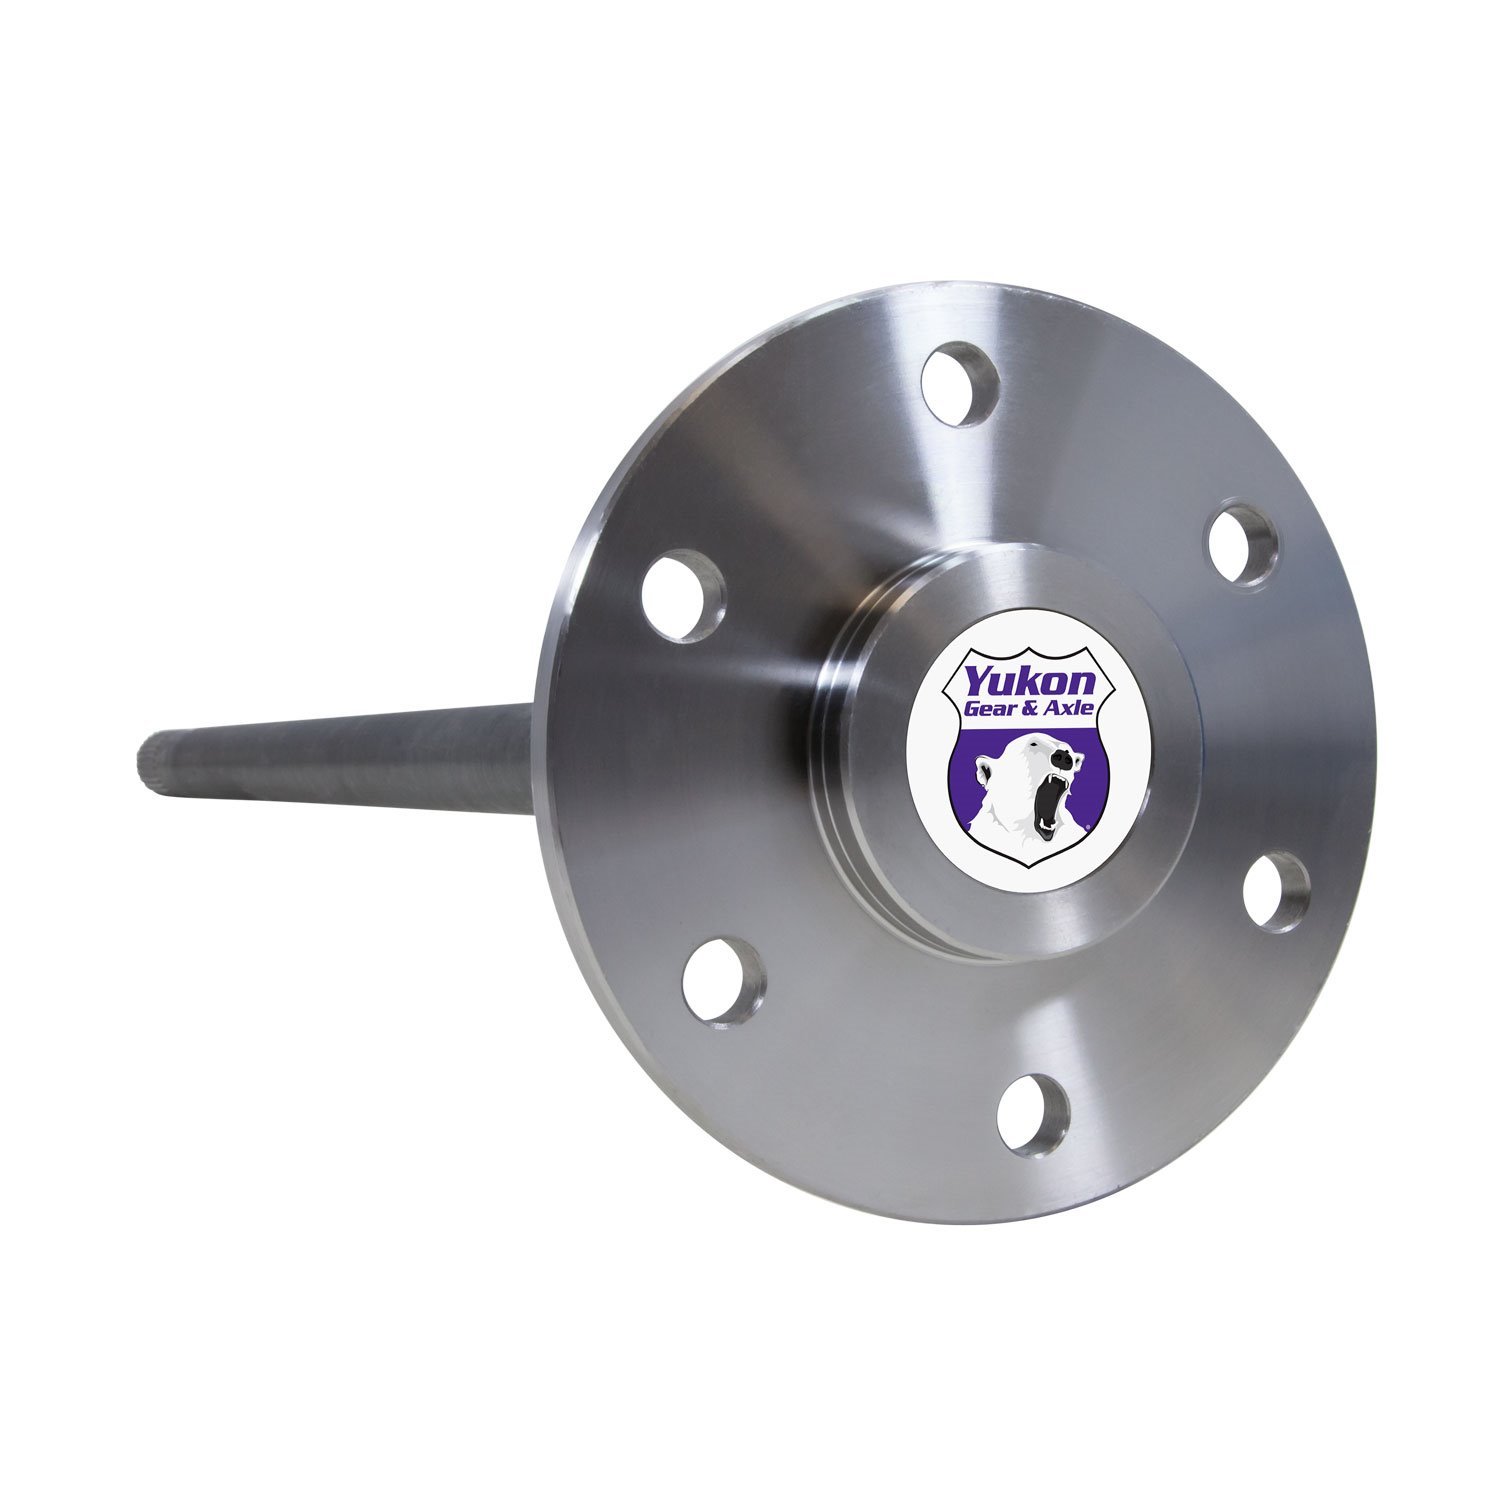 1541H Alloy 8 Lug Rear Axle For '99-'07 GM 9.5 in. Trucks And Suv'S